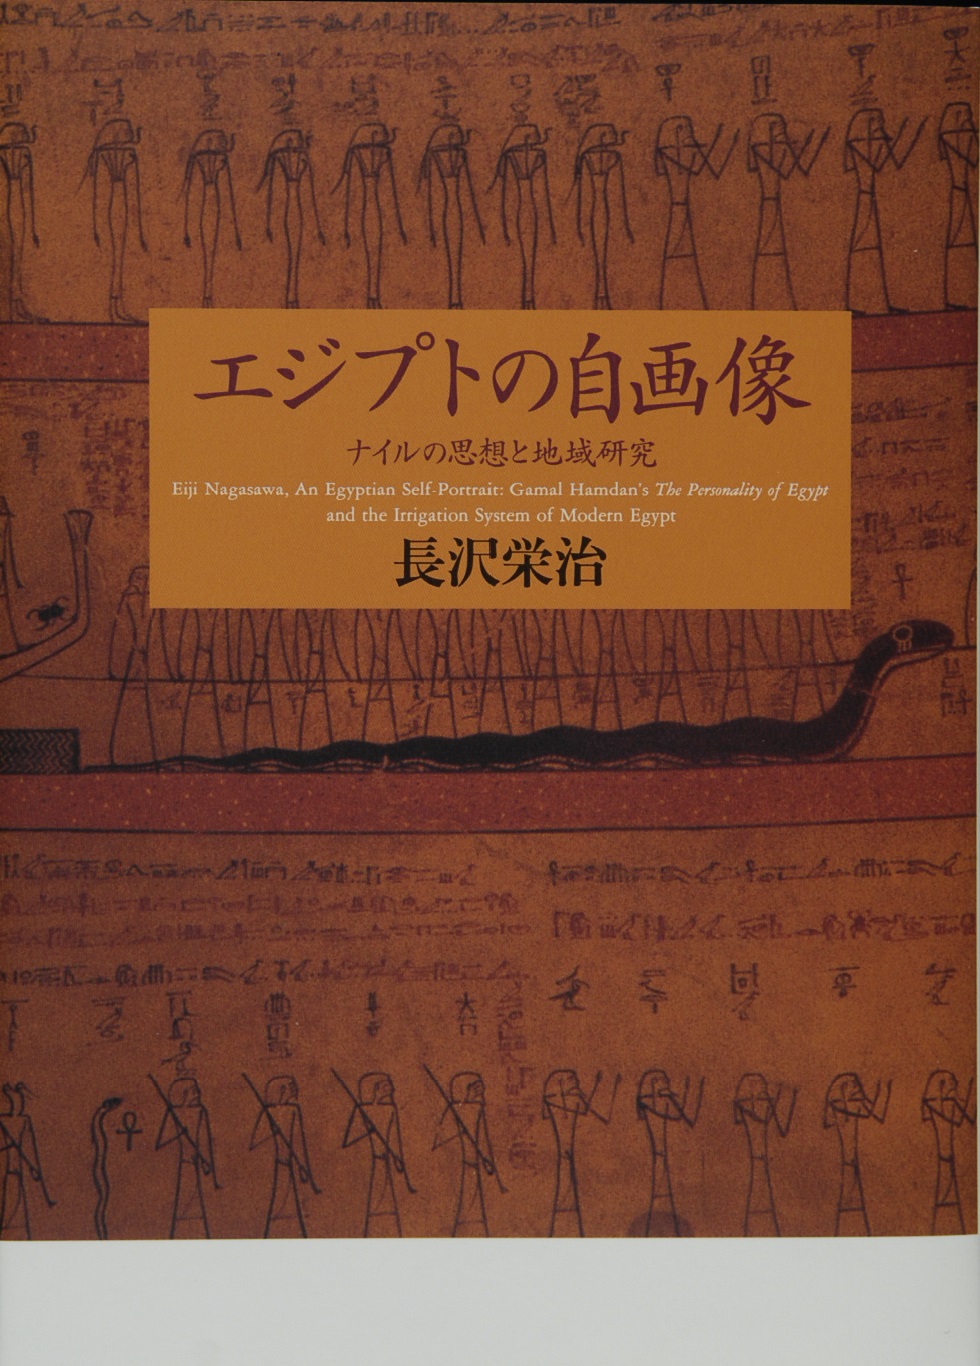 Ochre-colored cover with Egyptian drawings